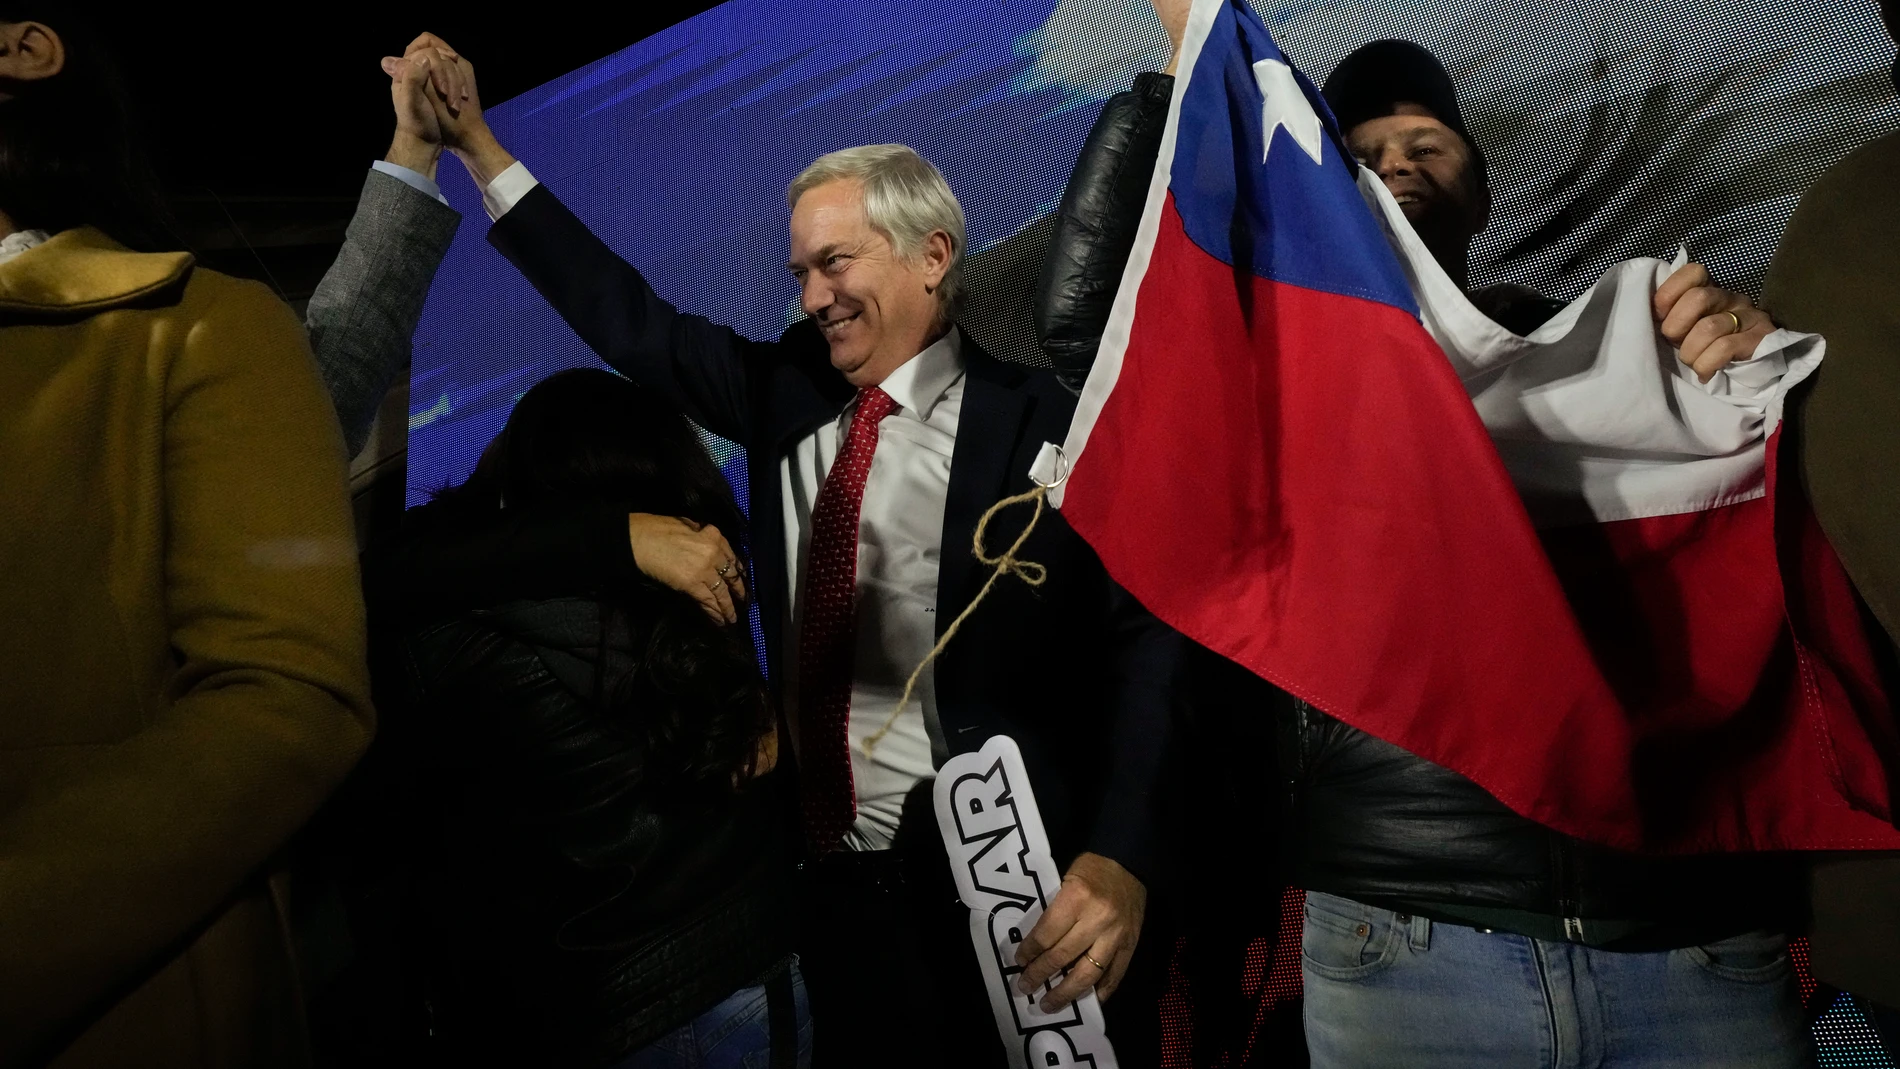 José Antonio Kast, leader of the Republican Party, raises his arm while celebrating obtaining the largest number of representatives after the election for the Constitutional Council, which will draft a new constitution proposal in Santiago, Chile, Sunday, May 7, 2023. A first attempt to replace the current charter bequeathed by the military 42 years ago was rejected by voters during a referendum in 2022. (AP Photo/Esteban Felix)